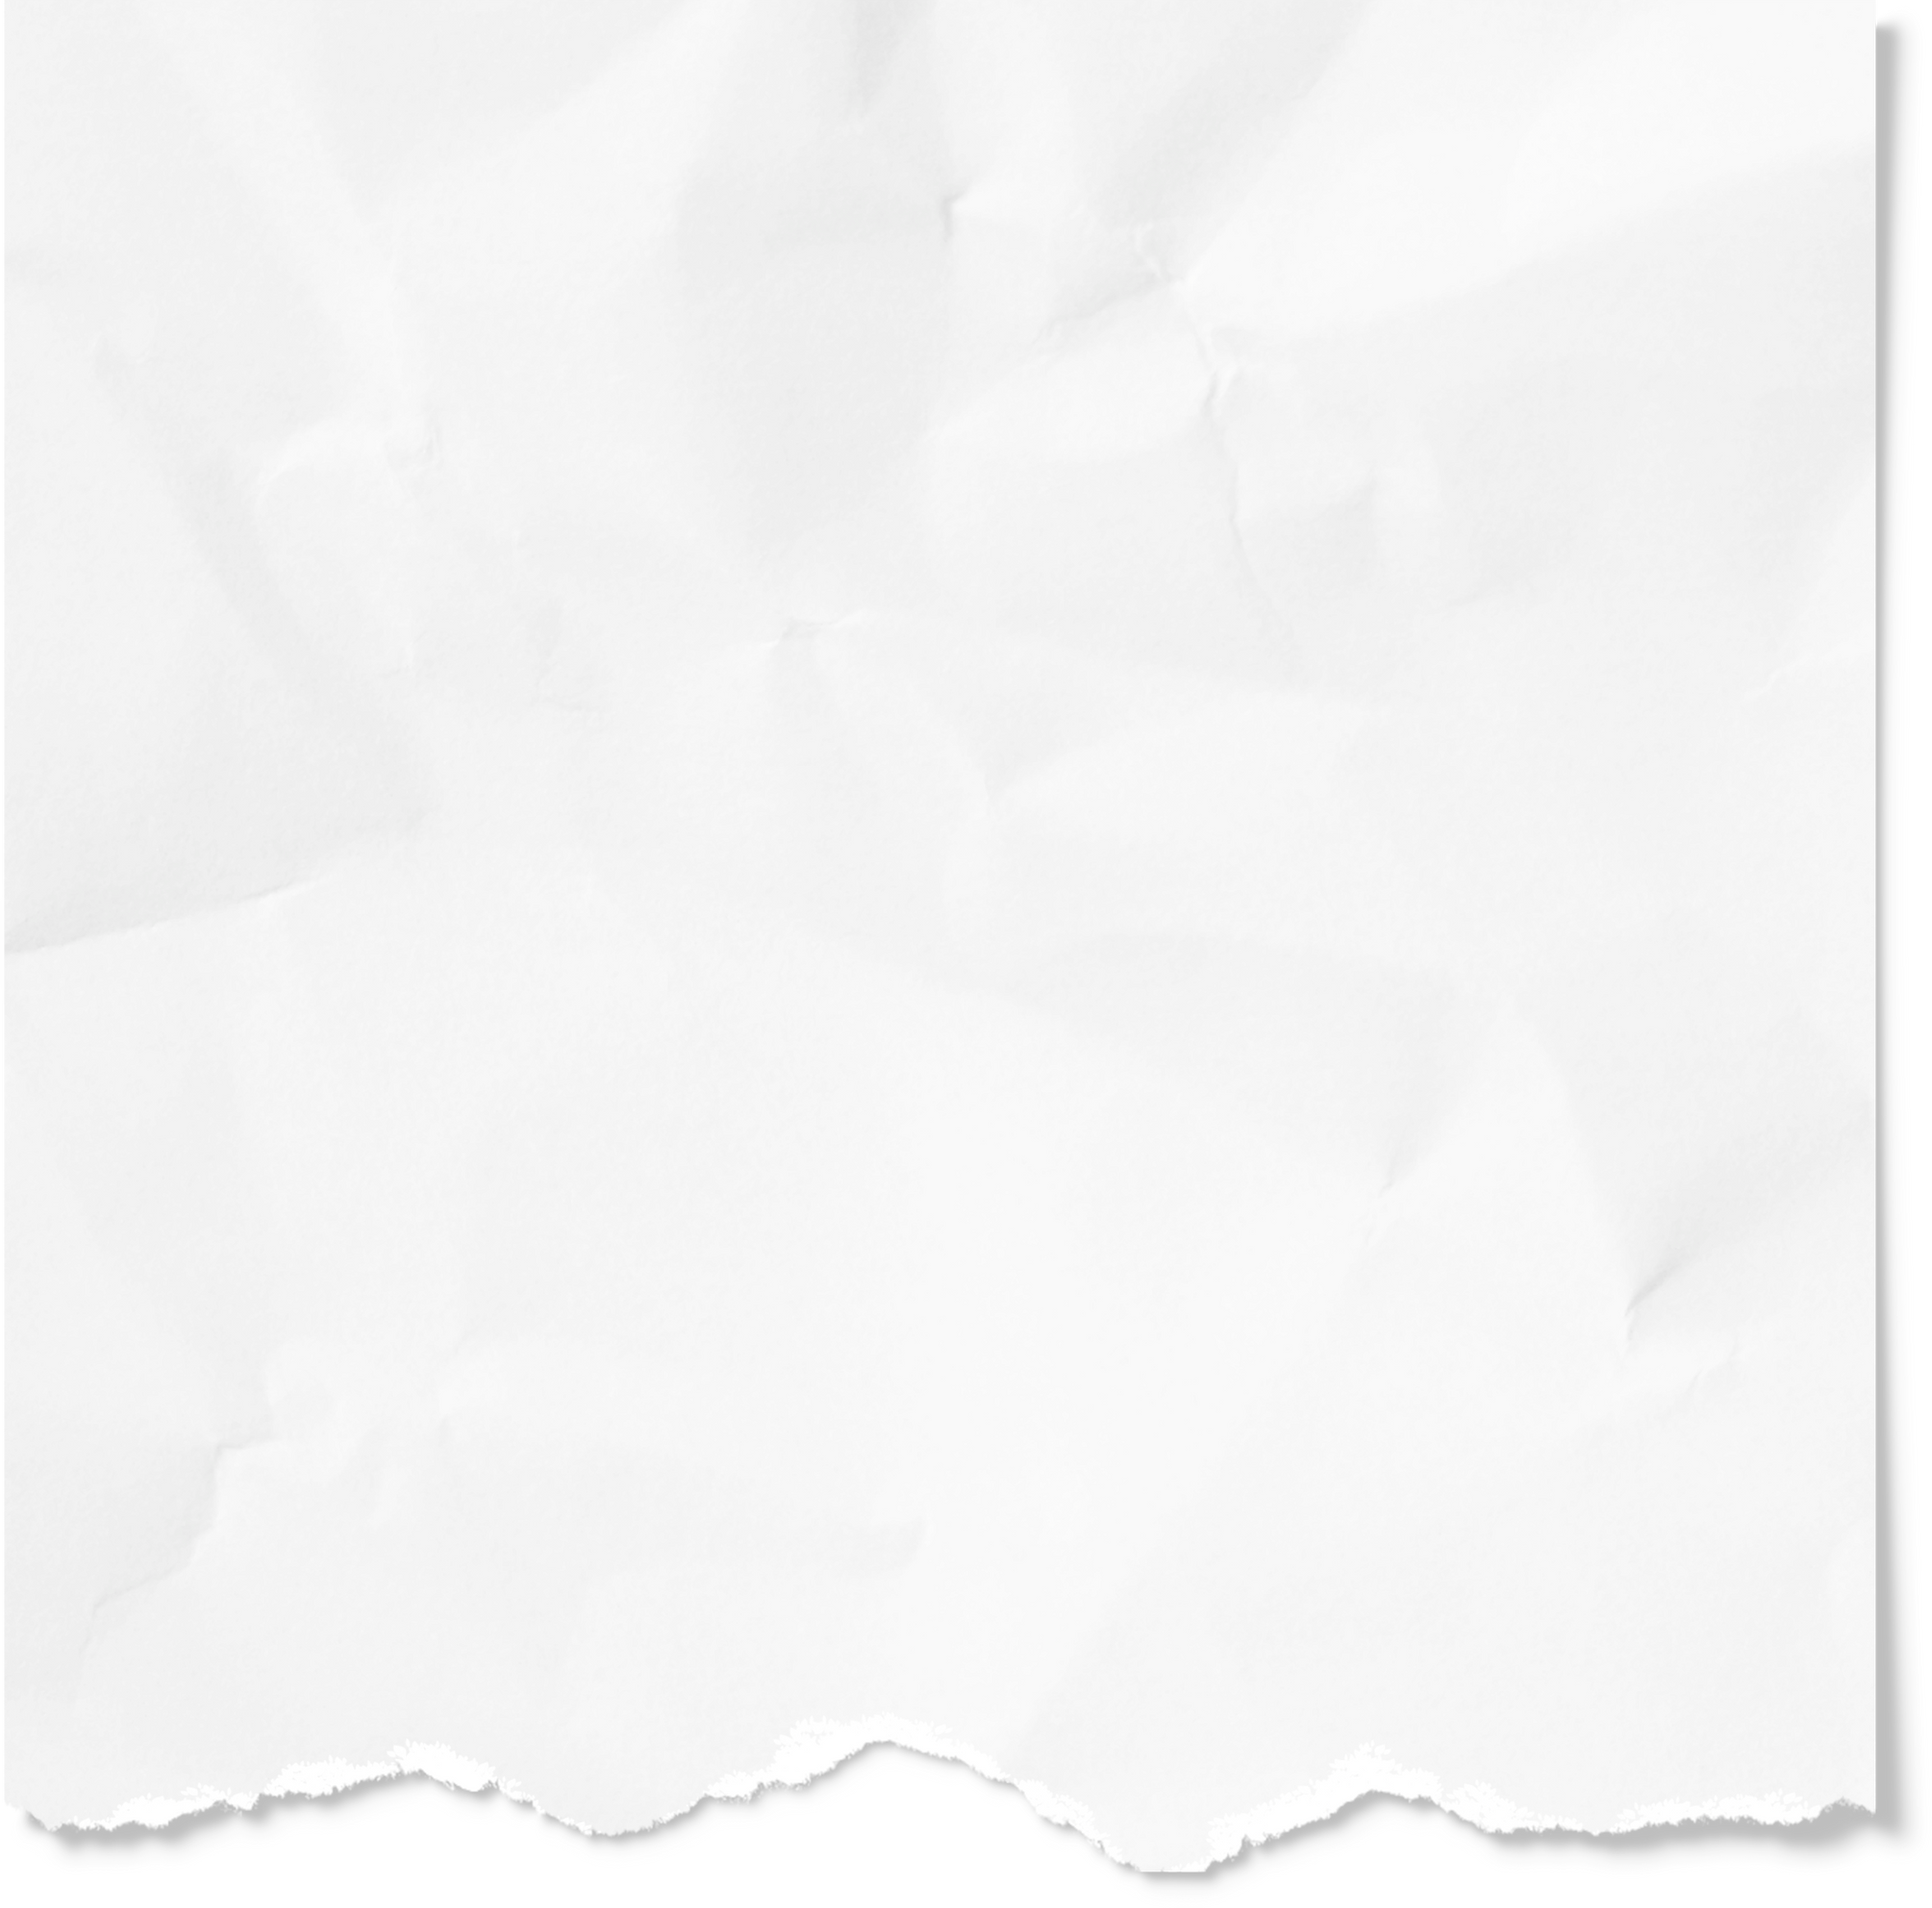 Torn White Sheet of Paper